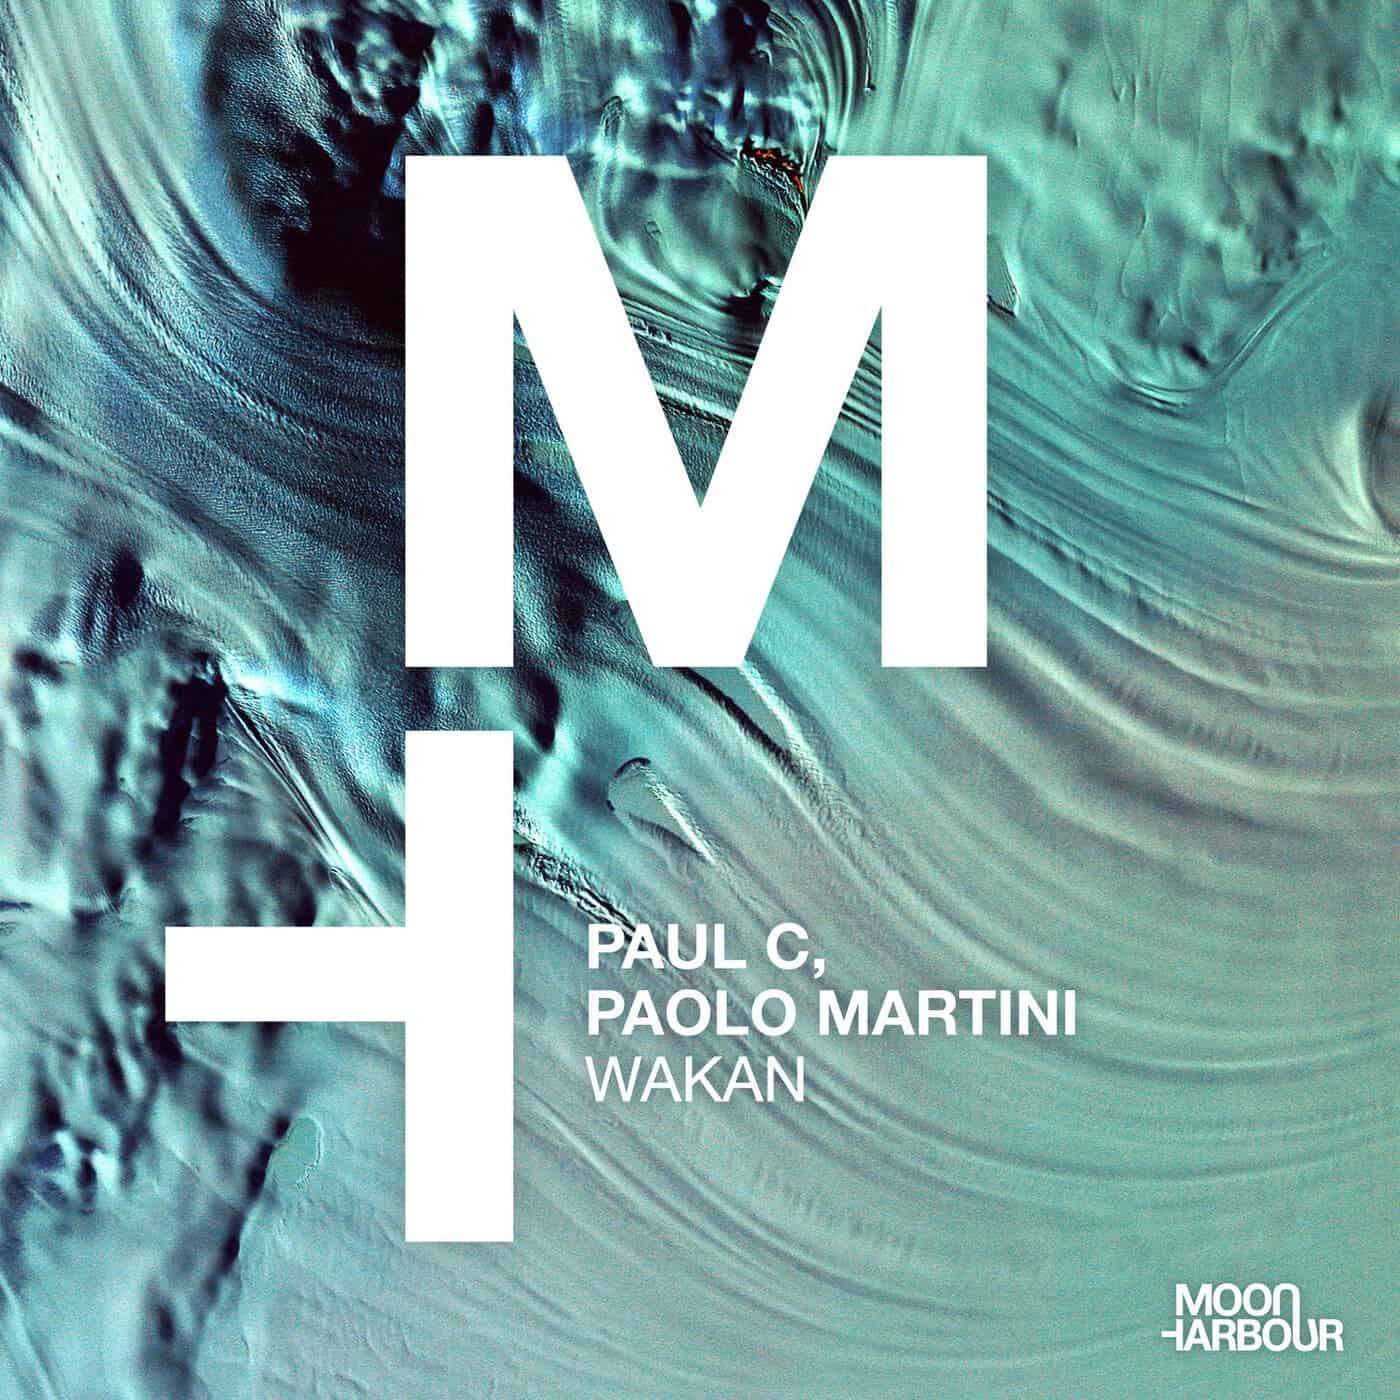 Download Paul C, Paolo Martini - Wakan on Electrobuzz